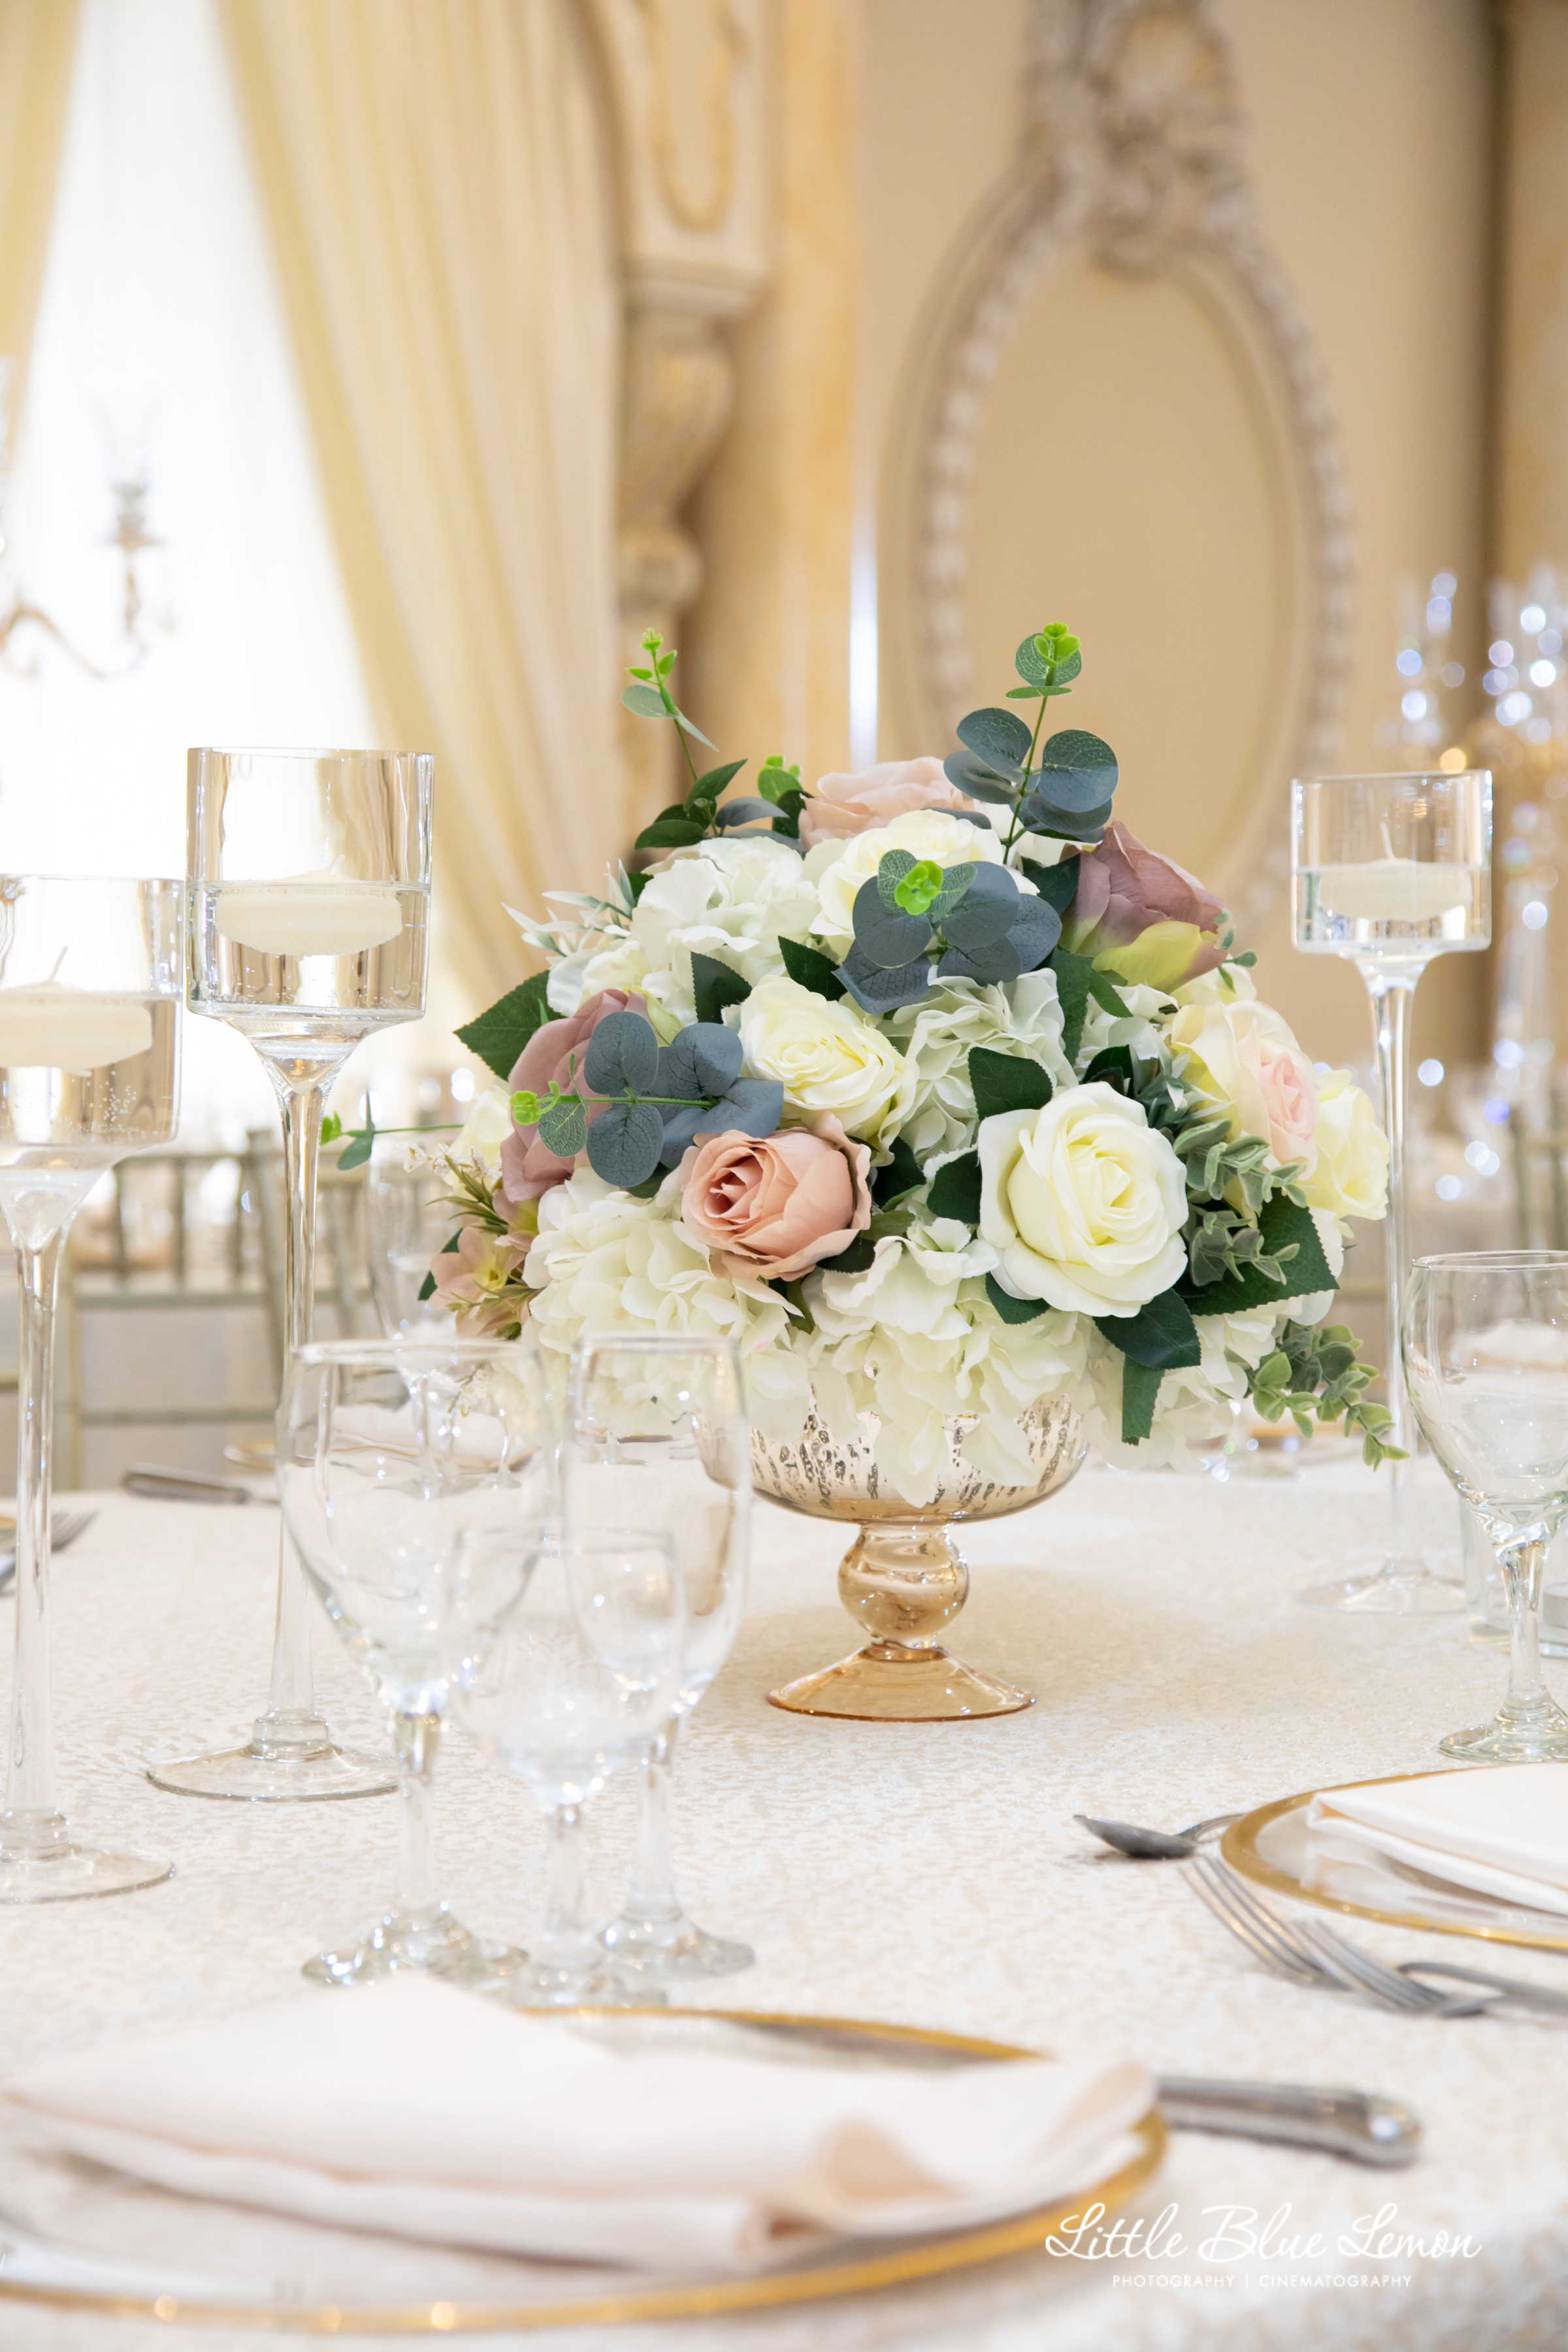 A flower arrangement set on a table with silverware and a white linen table sheet.